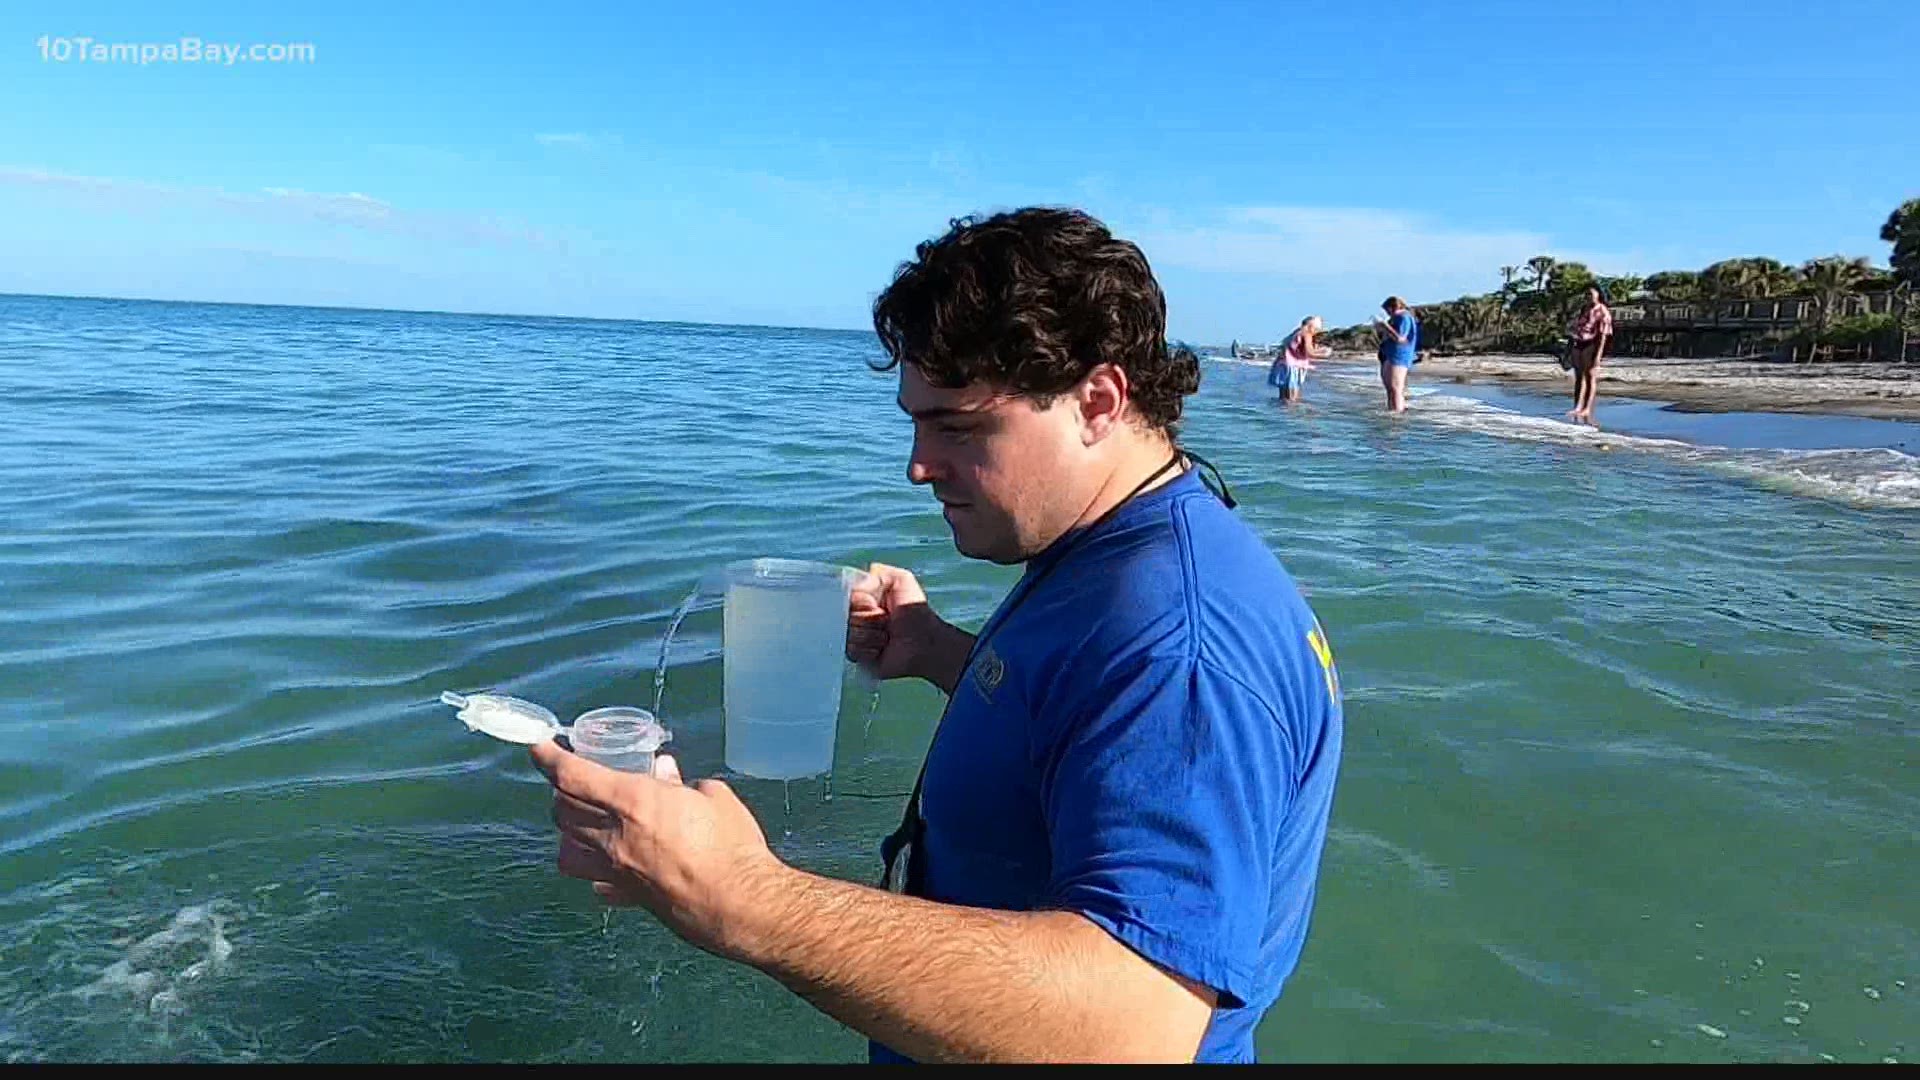 Scientists collect, analyze data and the information about beach conditions and red tide levels is uploaded to visitbeaches.org and its mobile app.